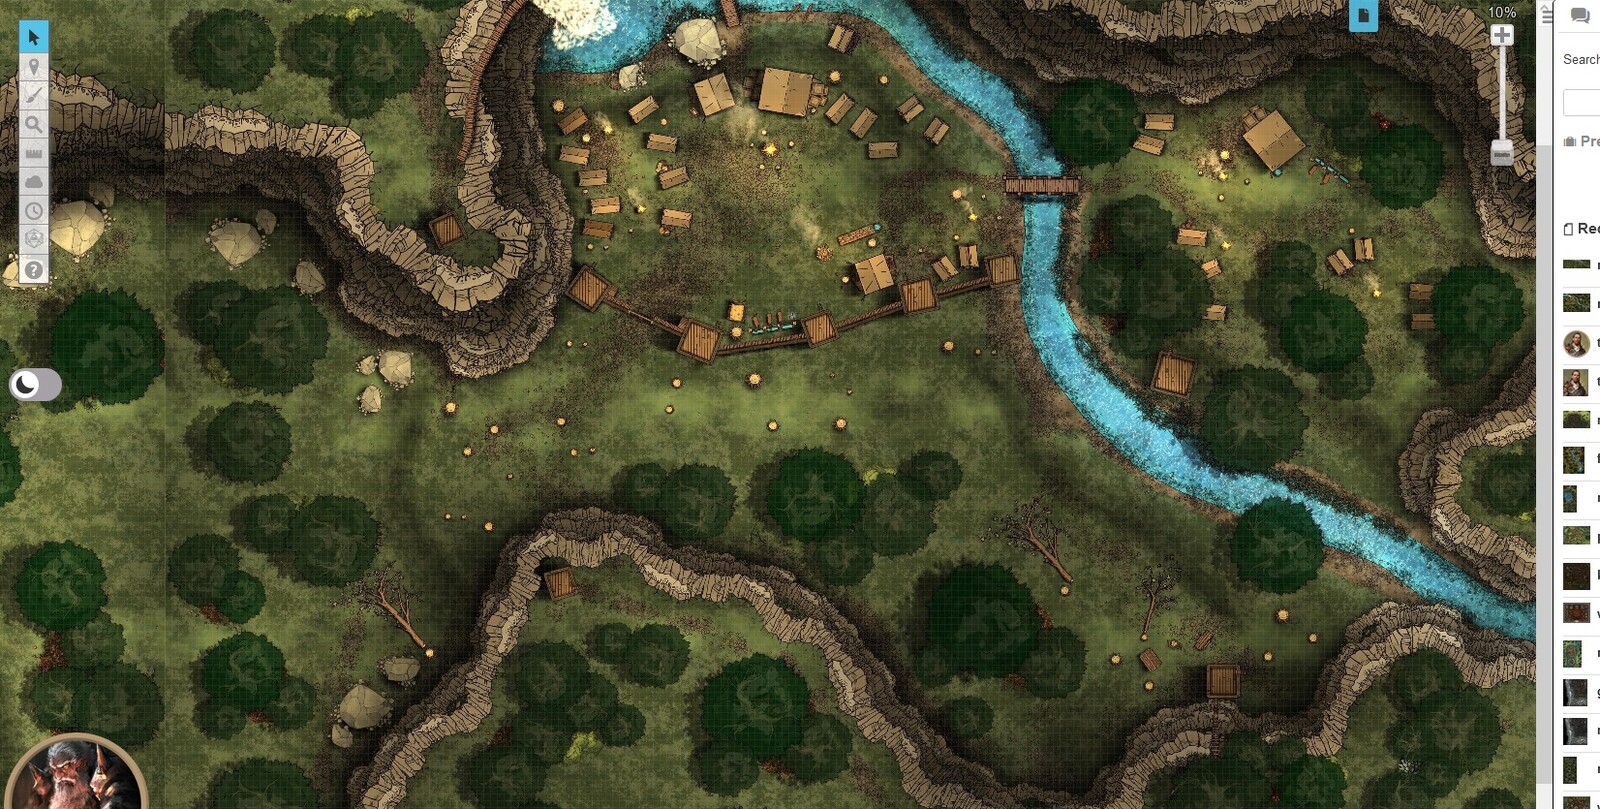 Roll20 Free (this actually a 480 x 160 map)